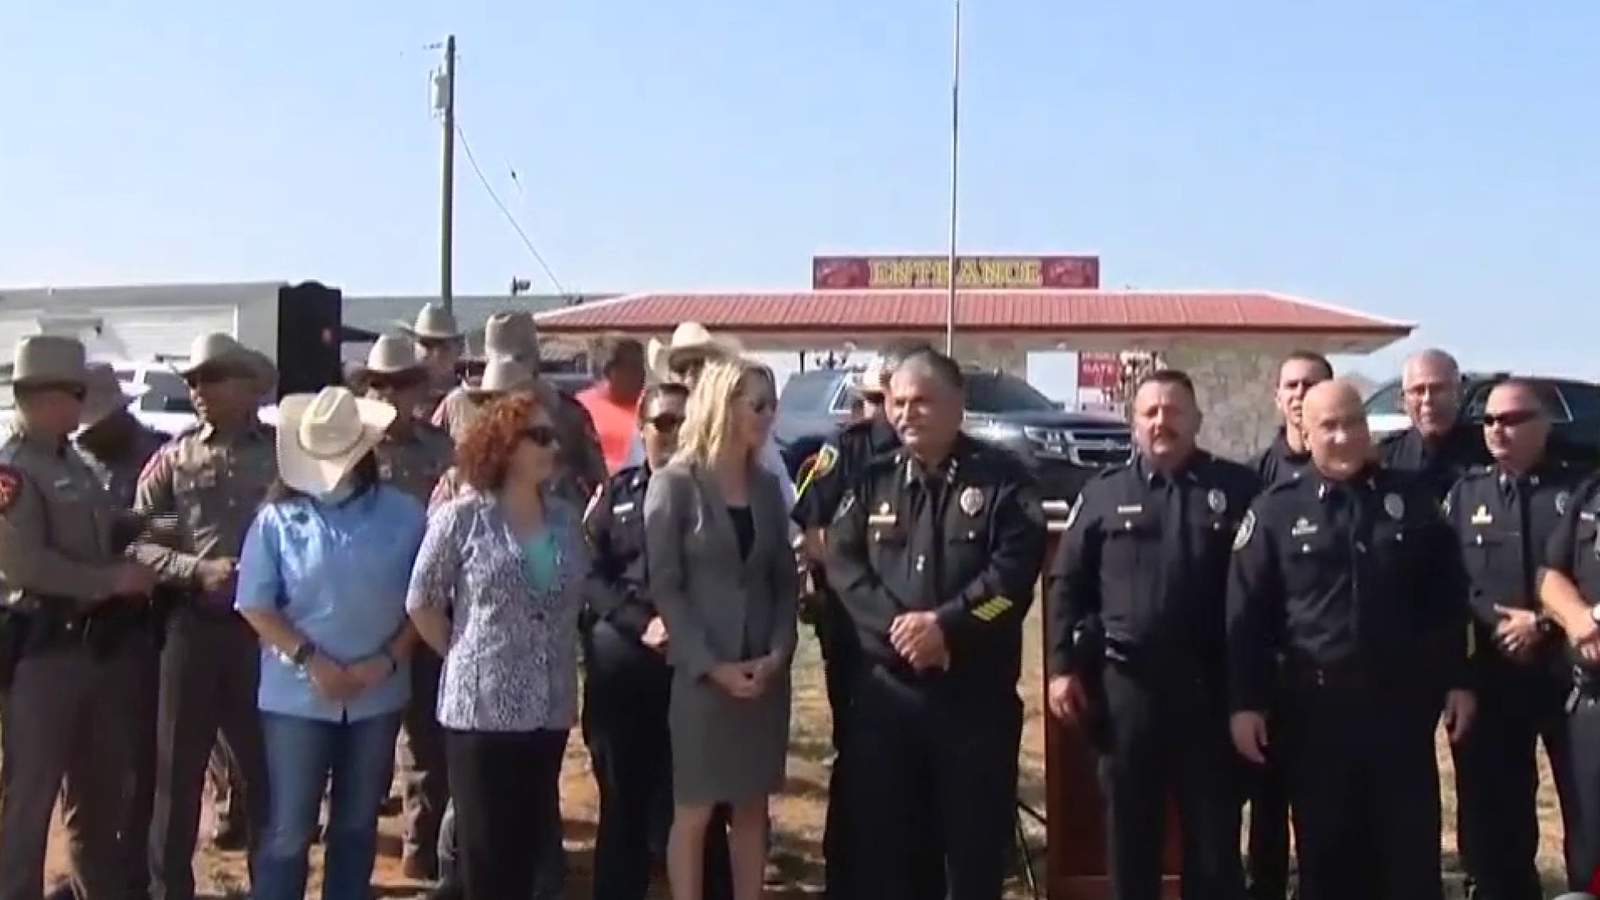 ‘No Refusal’ period declared during Poteet Strawberry Festival